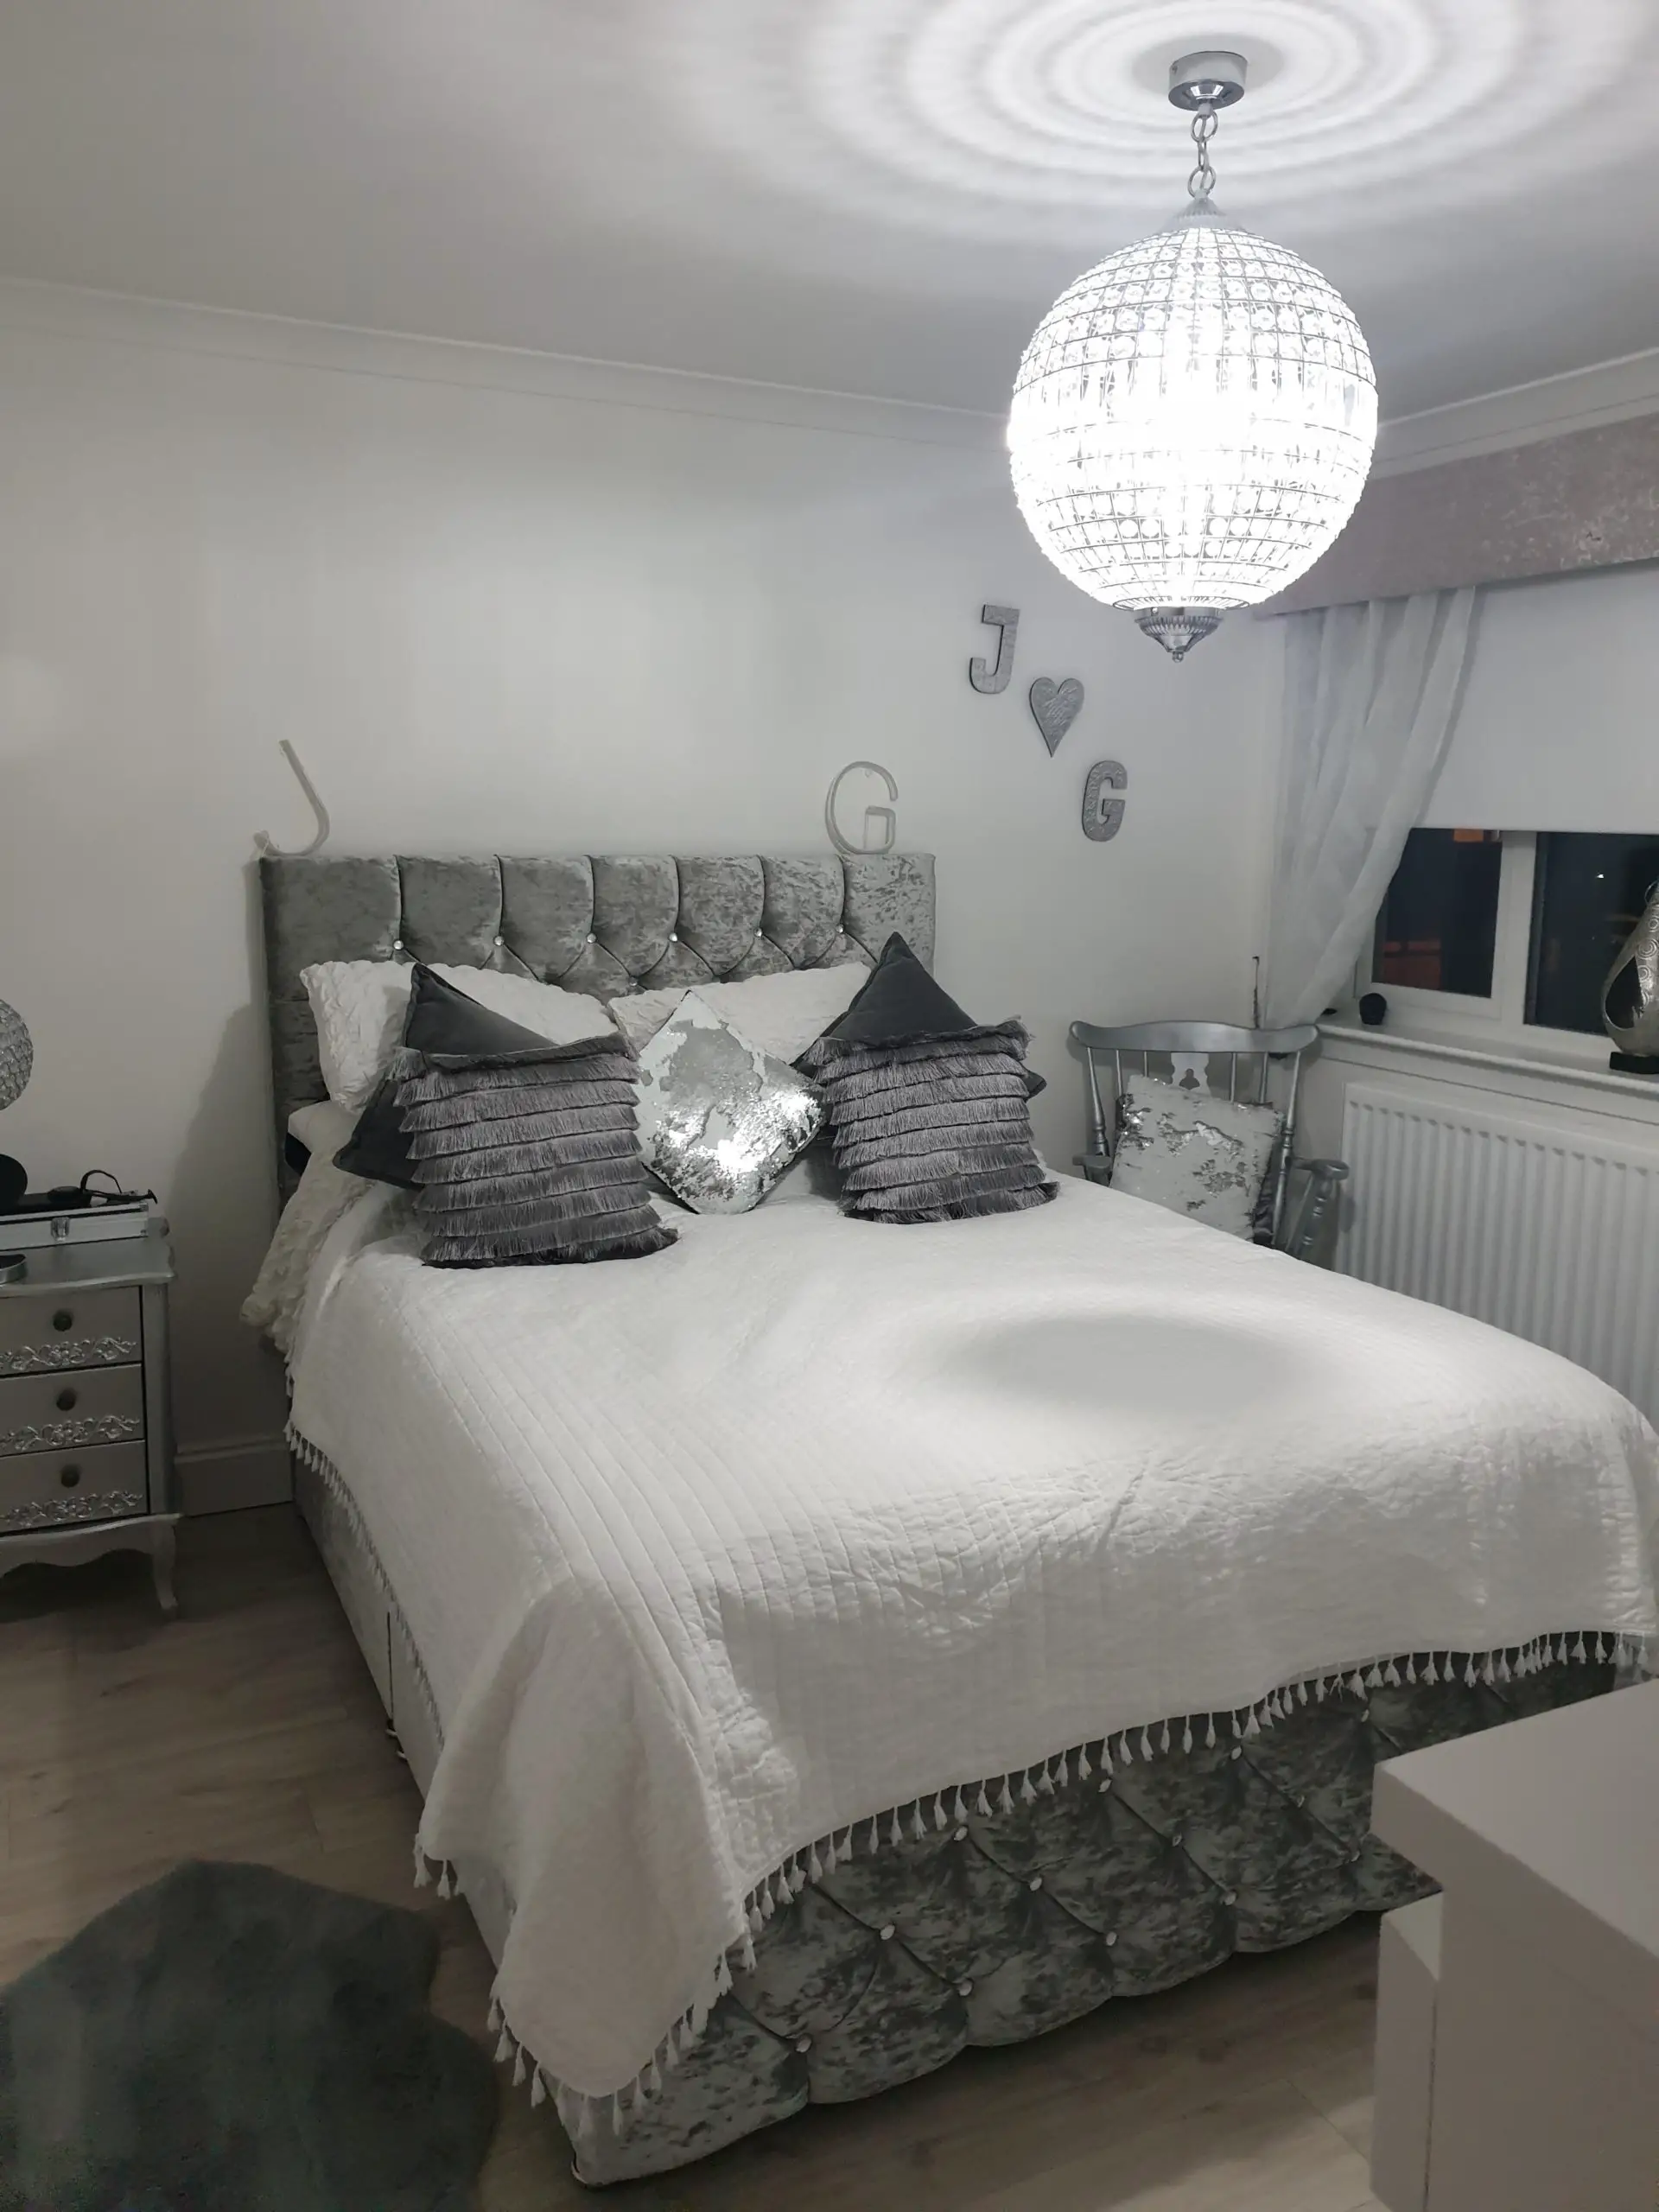 Gray and White Bedroom with Dome Light for Comfort Sleeping